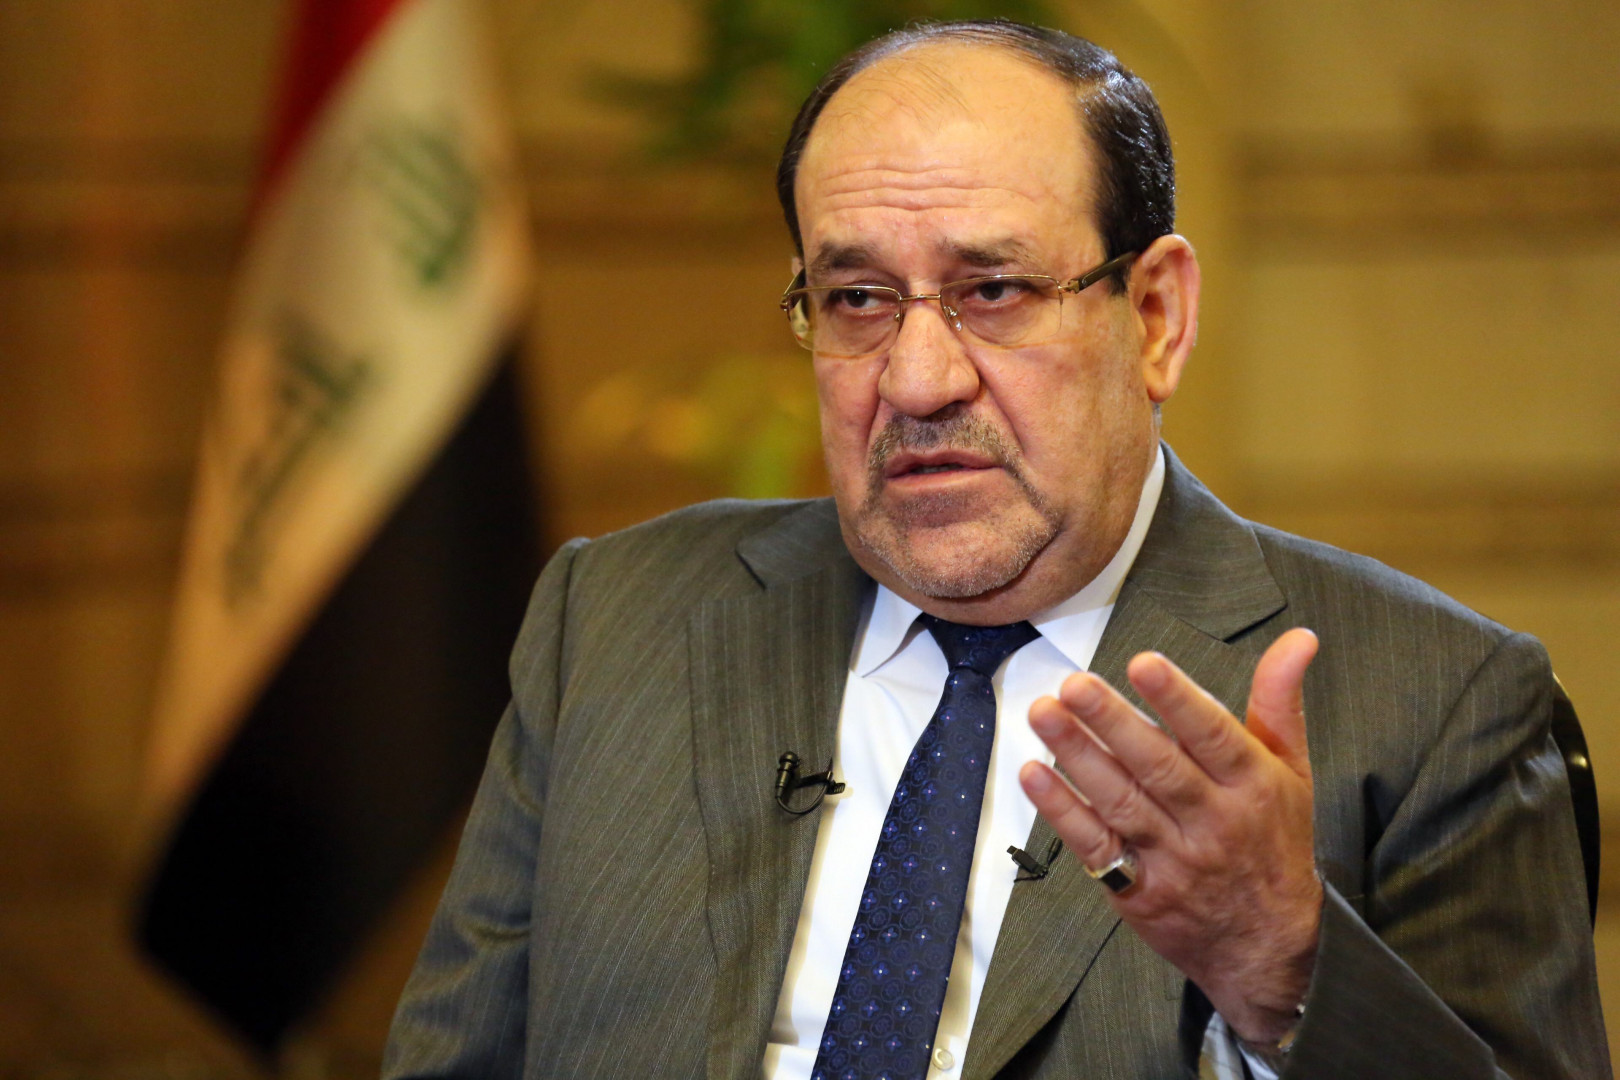 Al-Maliki calls the government to end the Turkish "excesses" on Iraqi territory